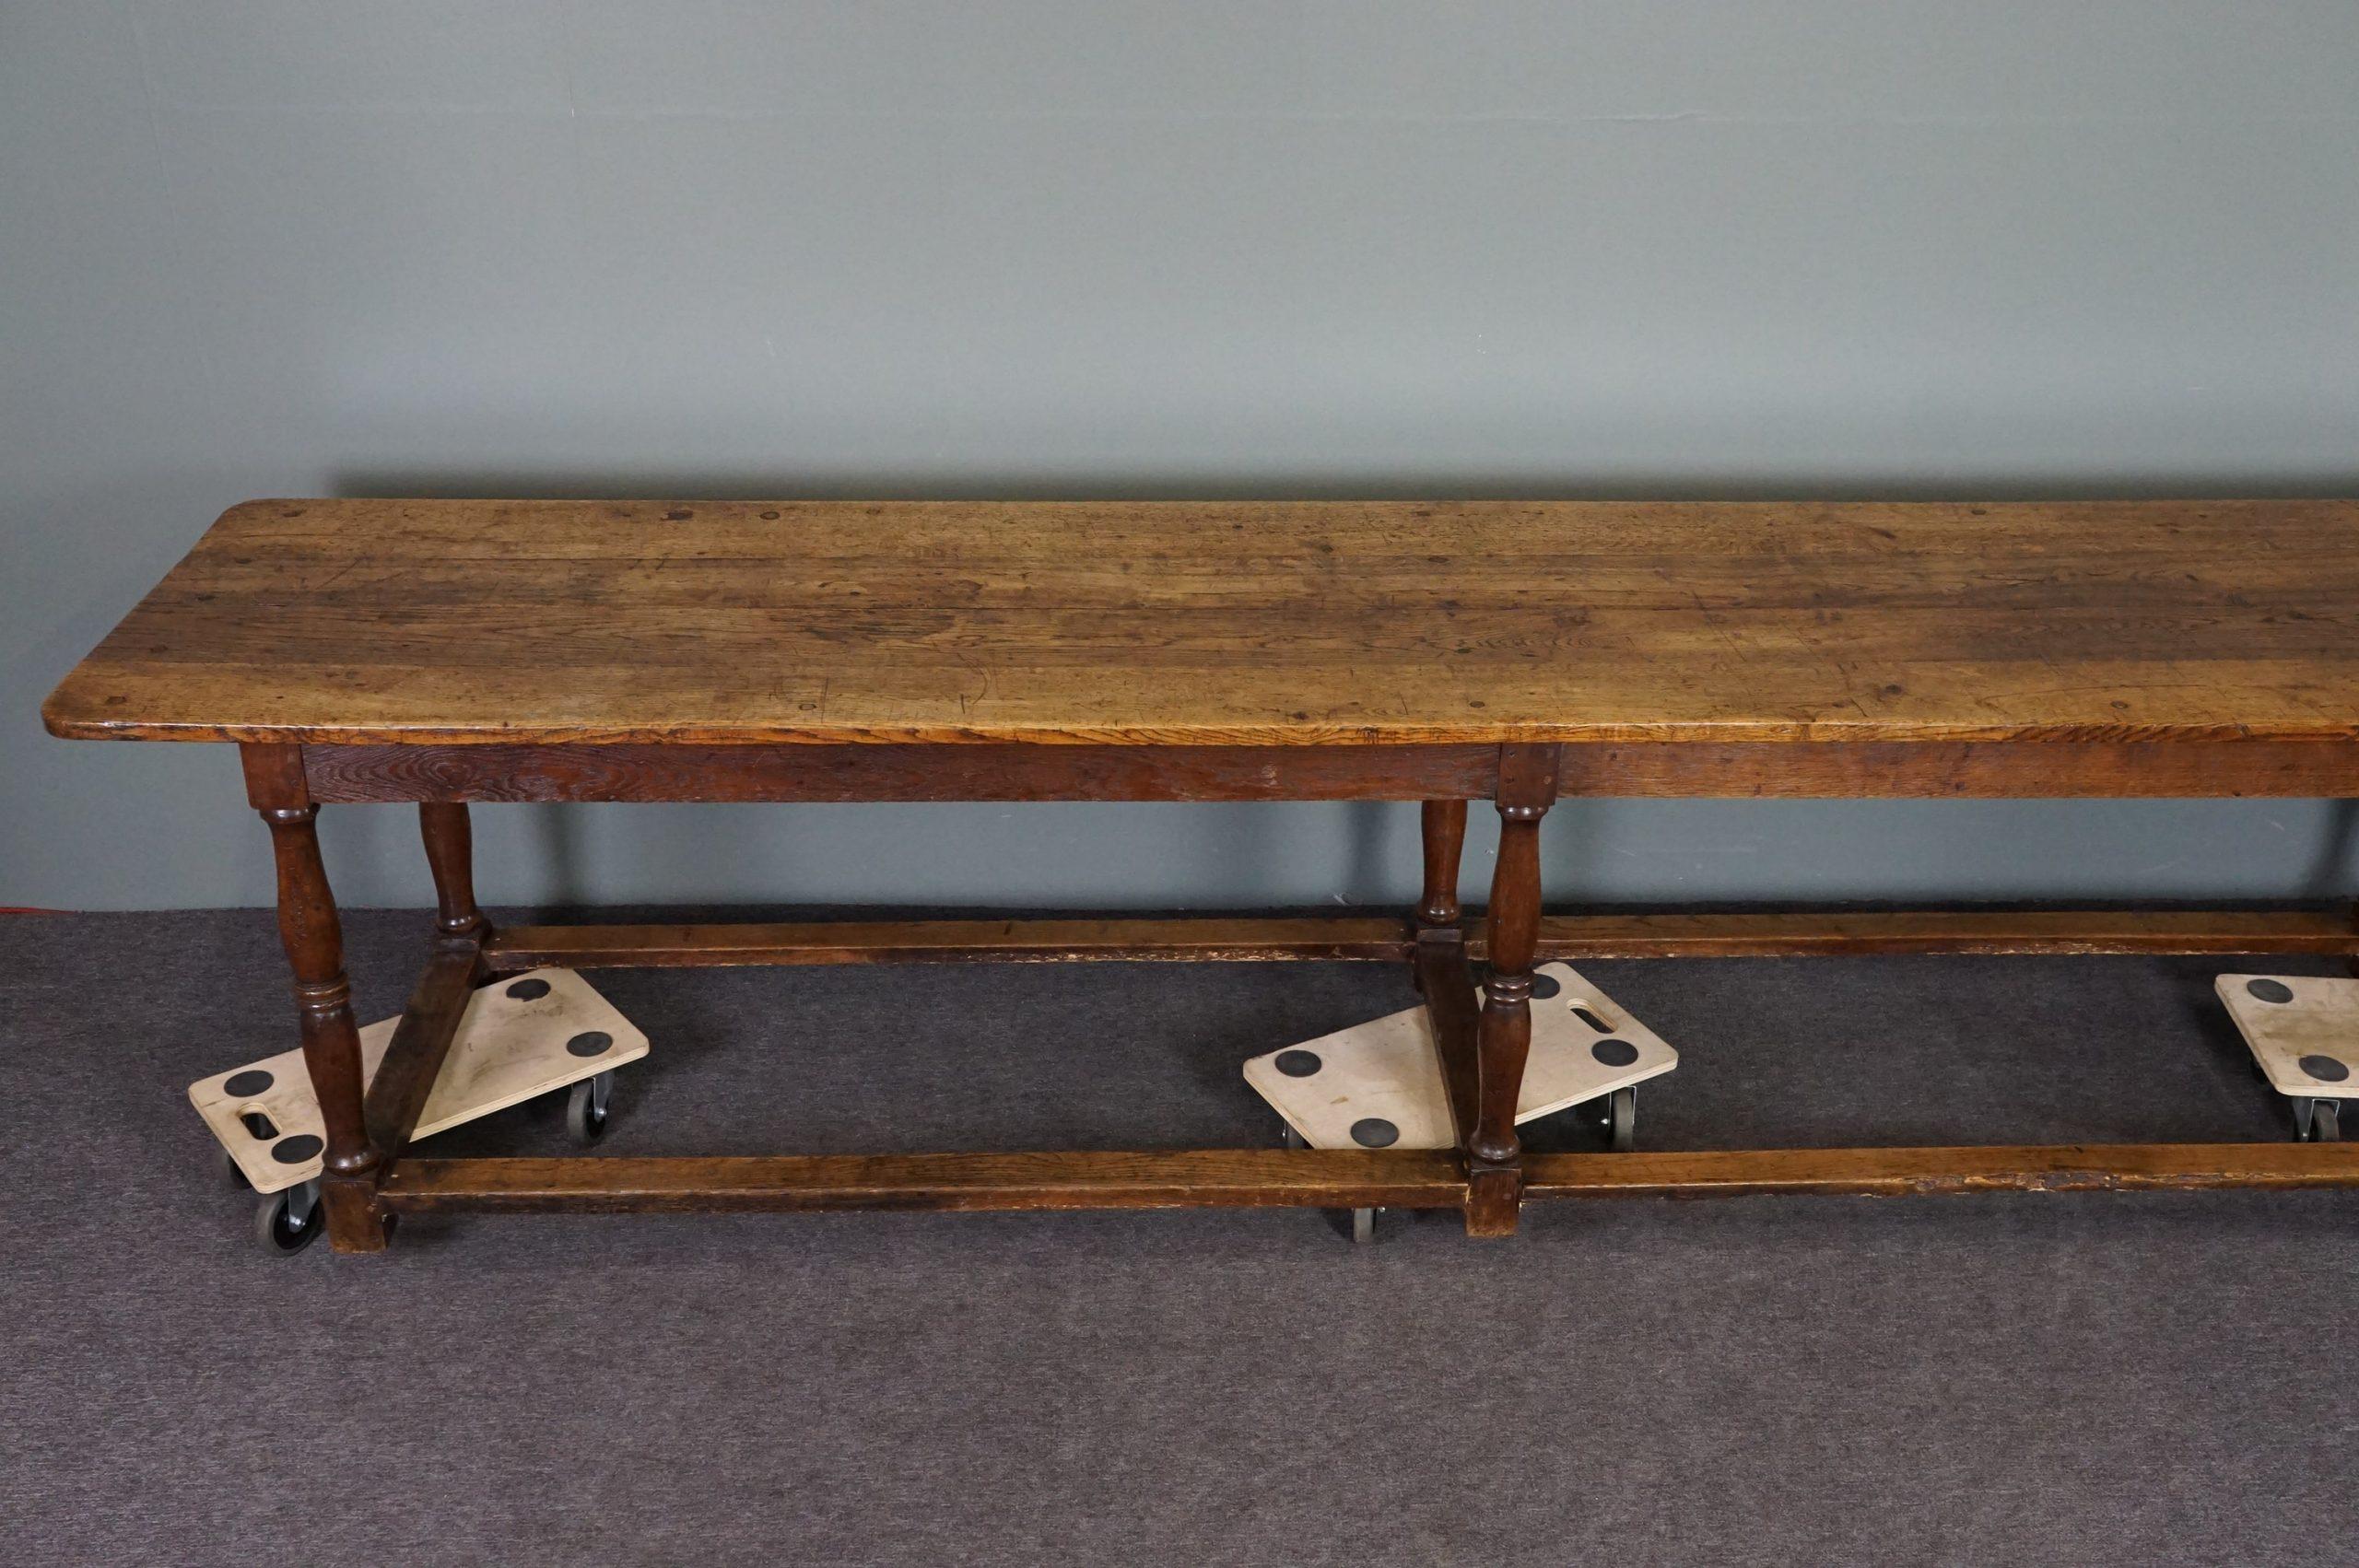 Oak Very long antique 19th century English oak diningtable, 5 meter, Refectory table For Sale